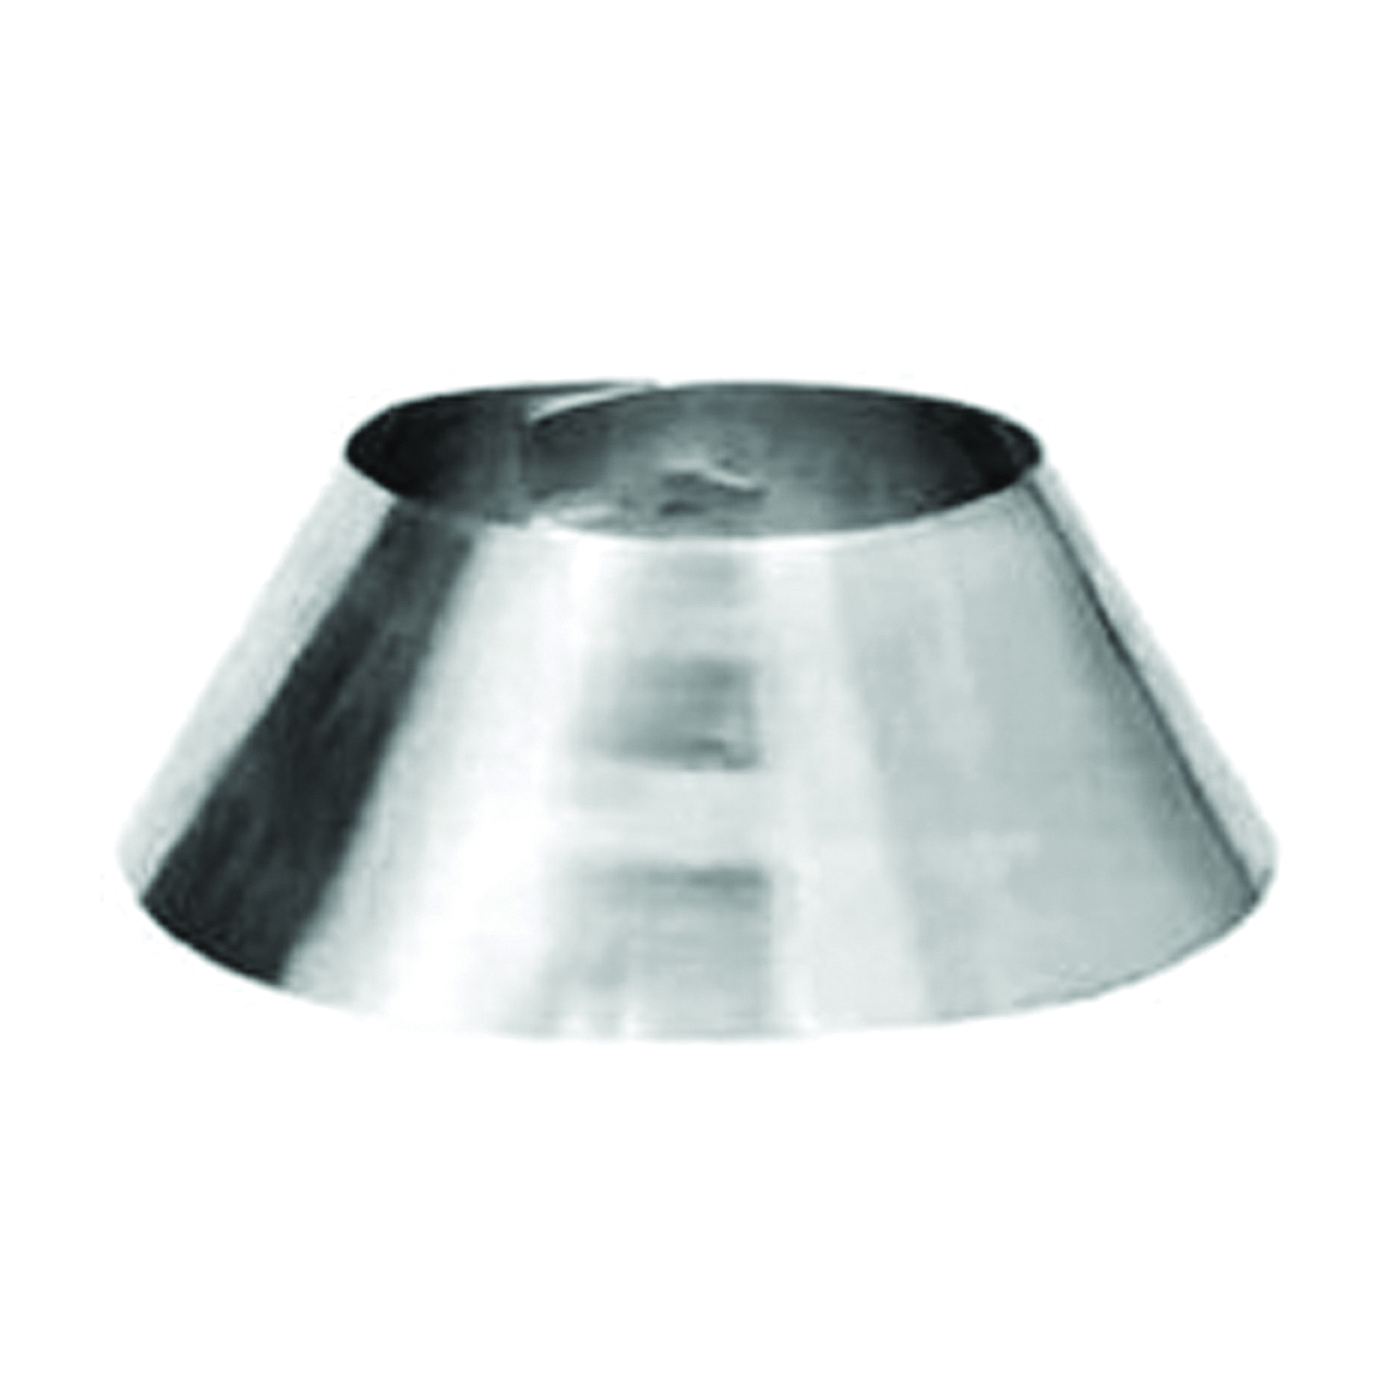 208810 Storm Collar, For: Round Chimney Pipe